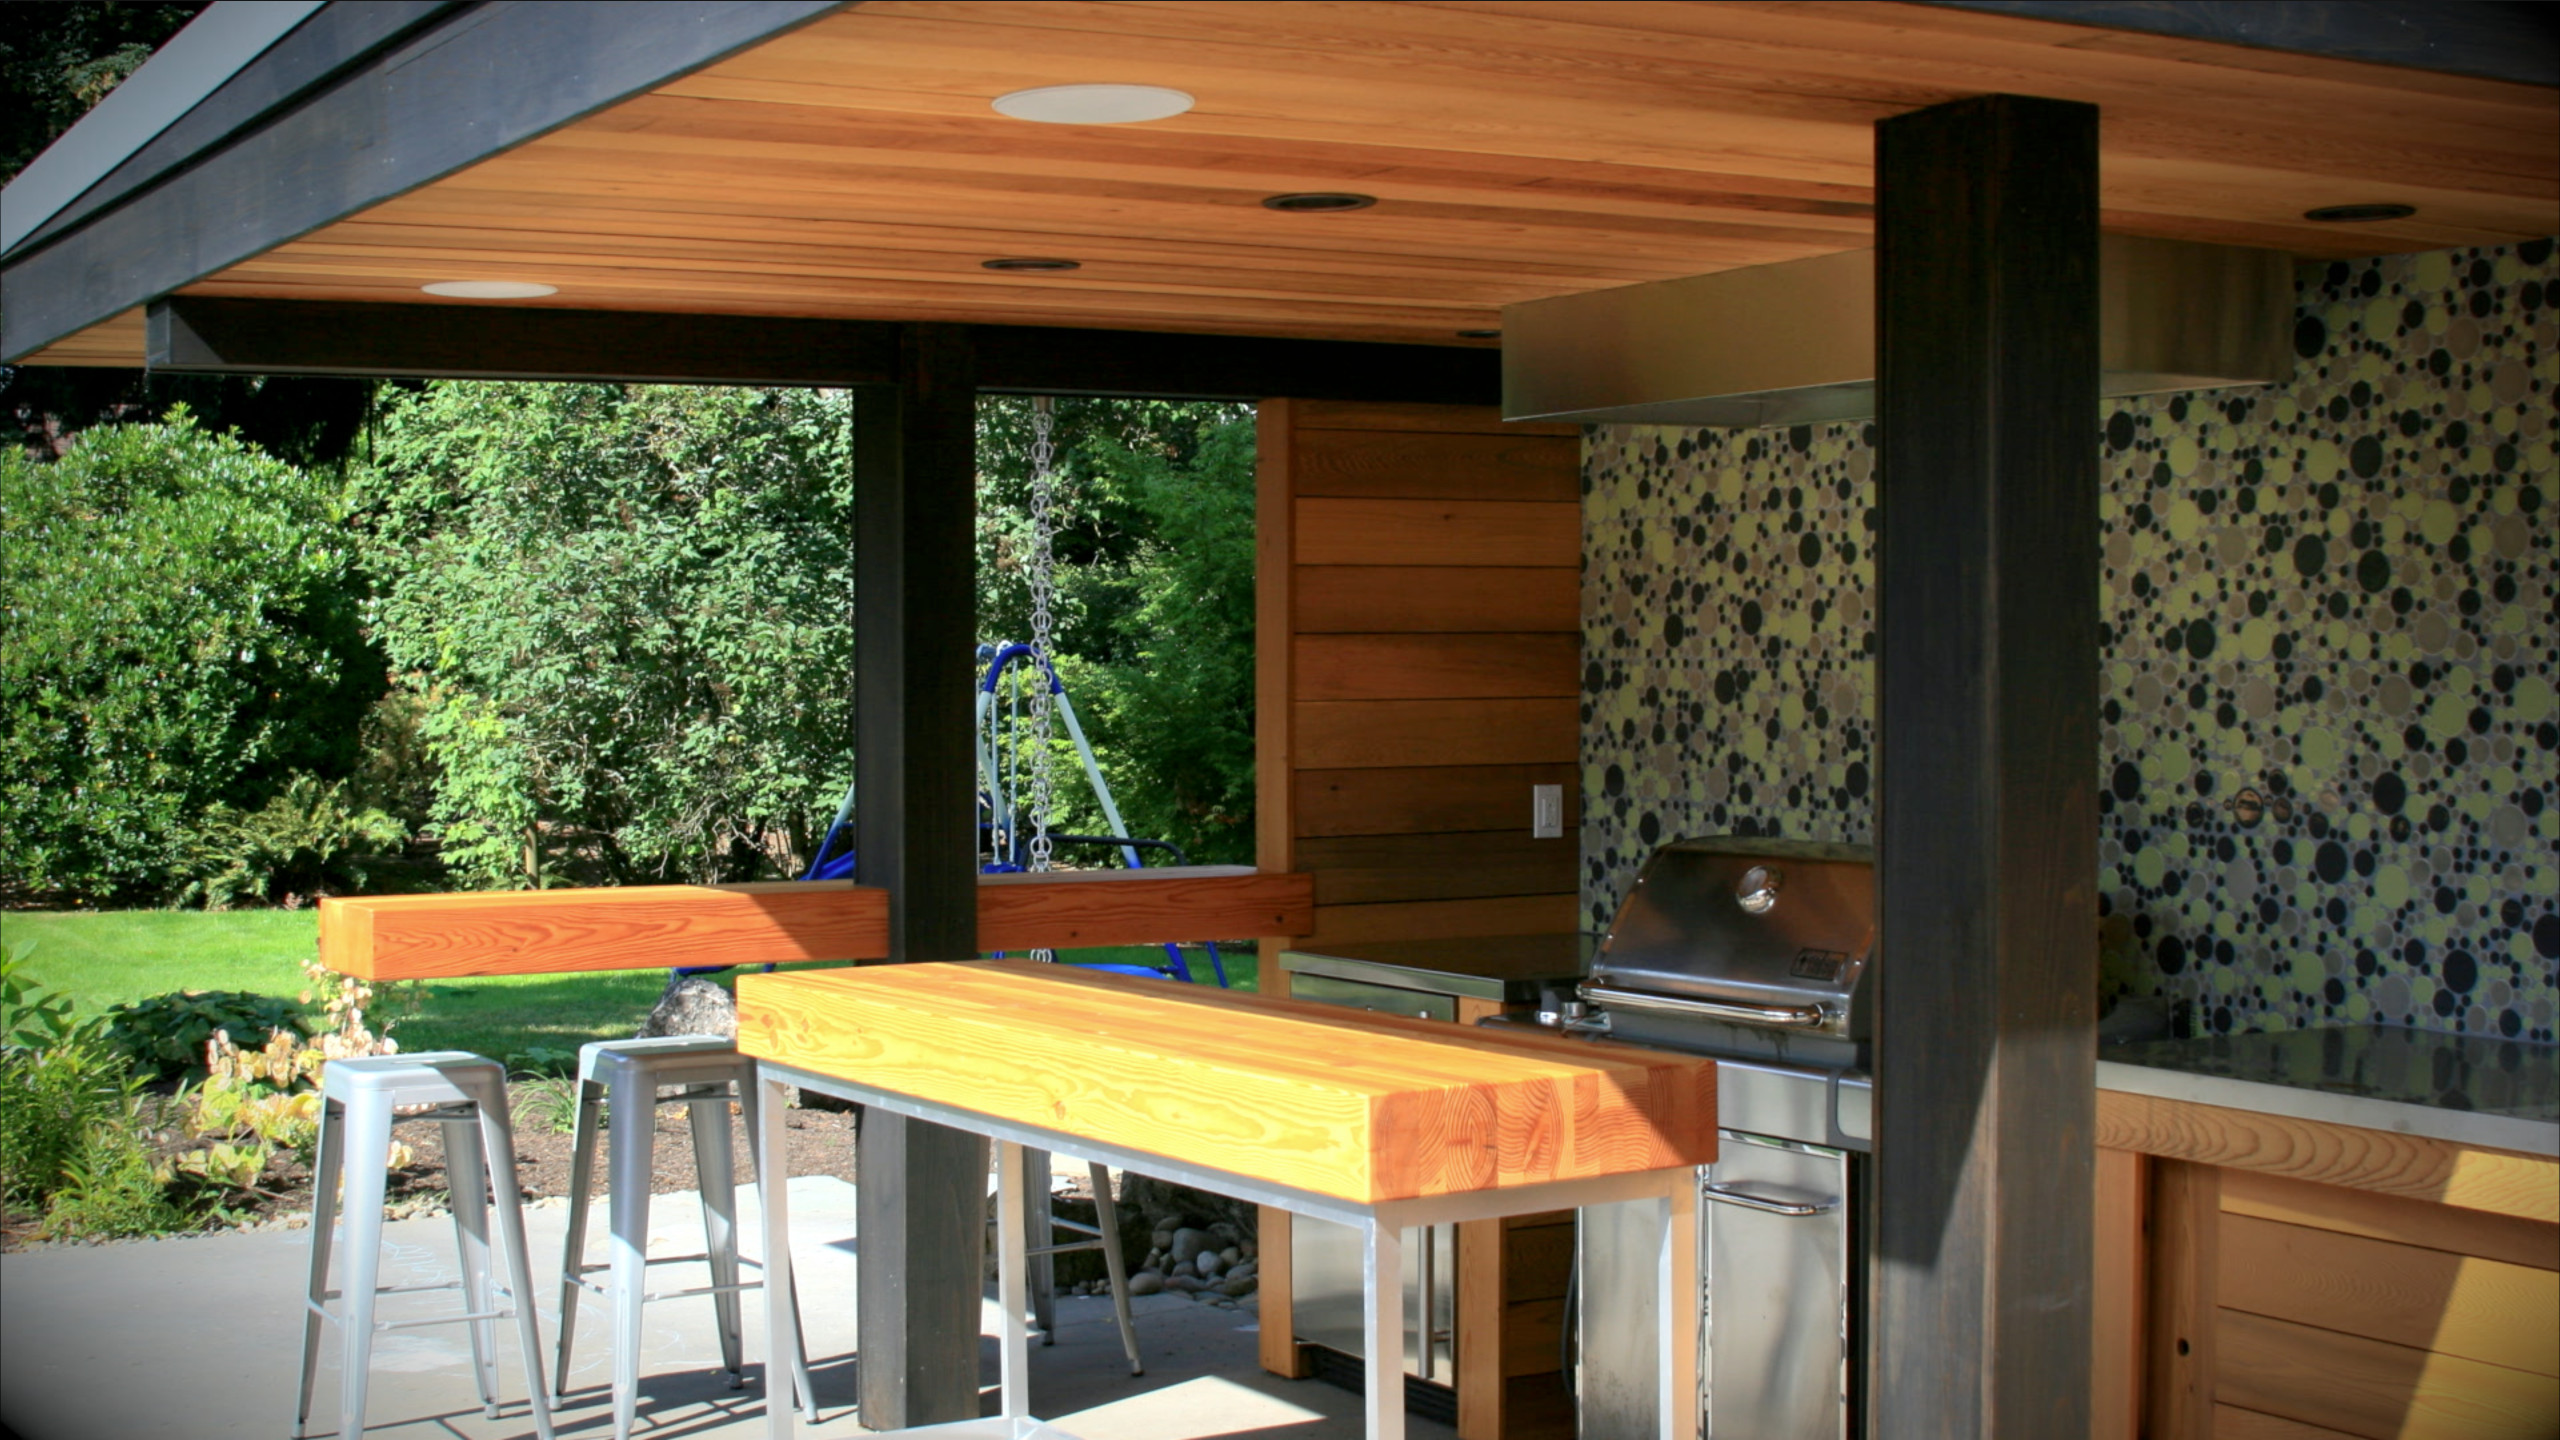 Covered outdoor kitchen patio